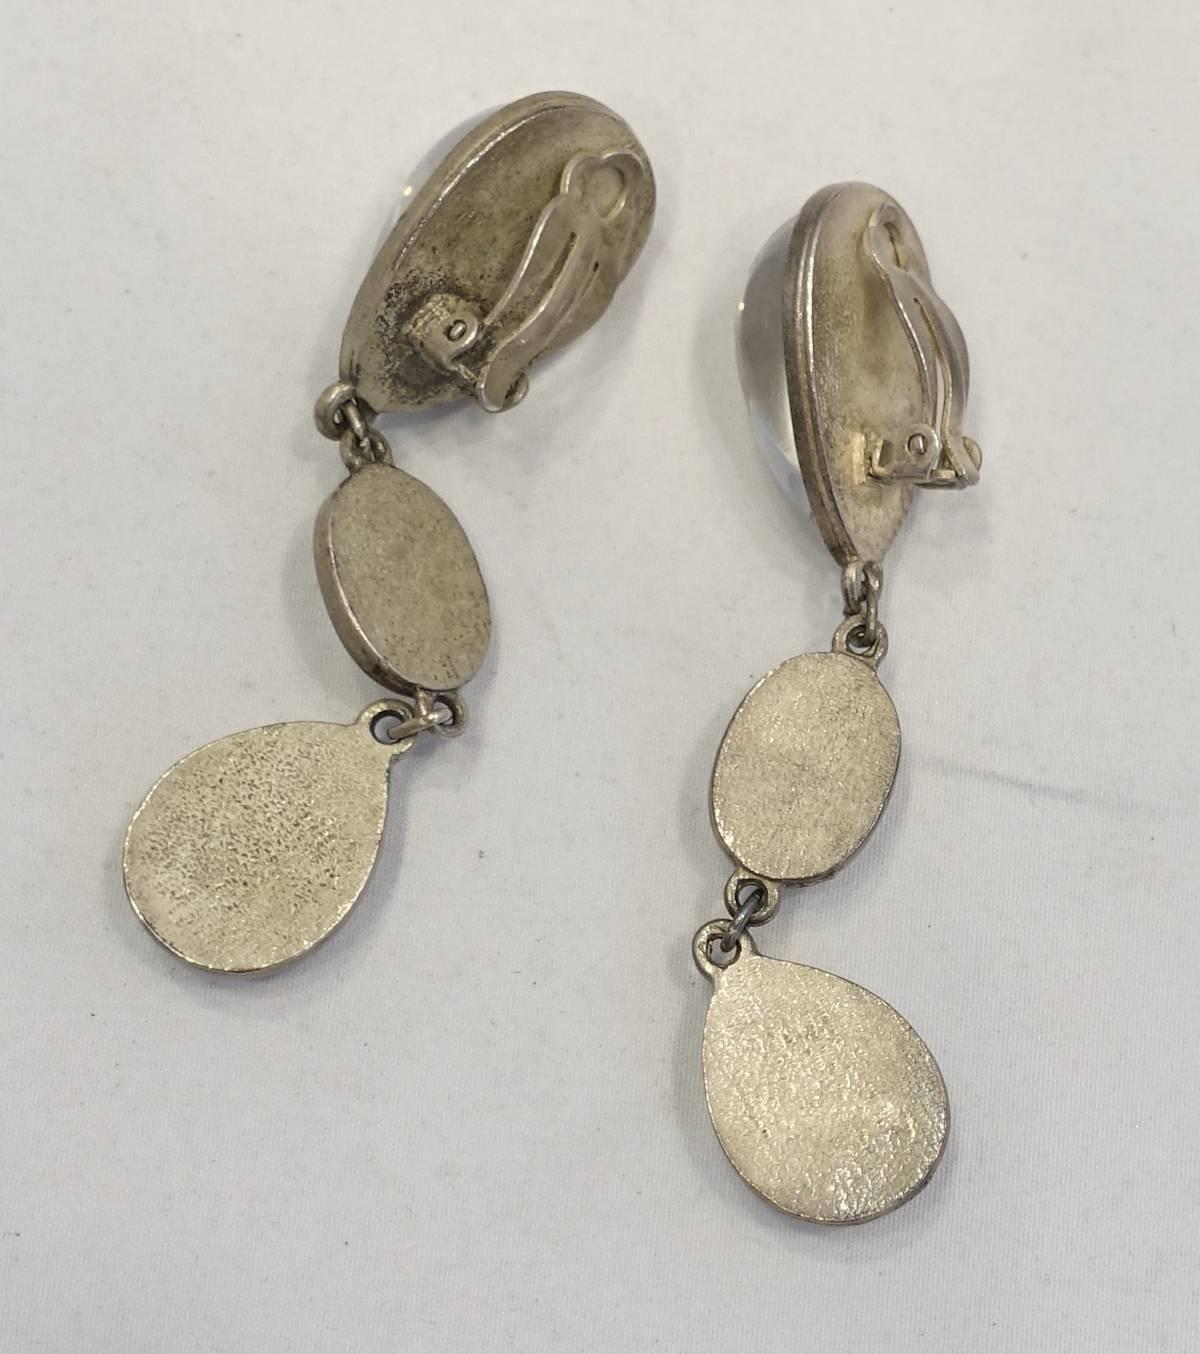 These statement earrings each feature clear cabochon stones in a silver tone setting.  These clip earrings measure 3-1/4” x 3/4” and are in excellent condition.